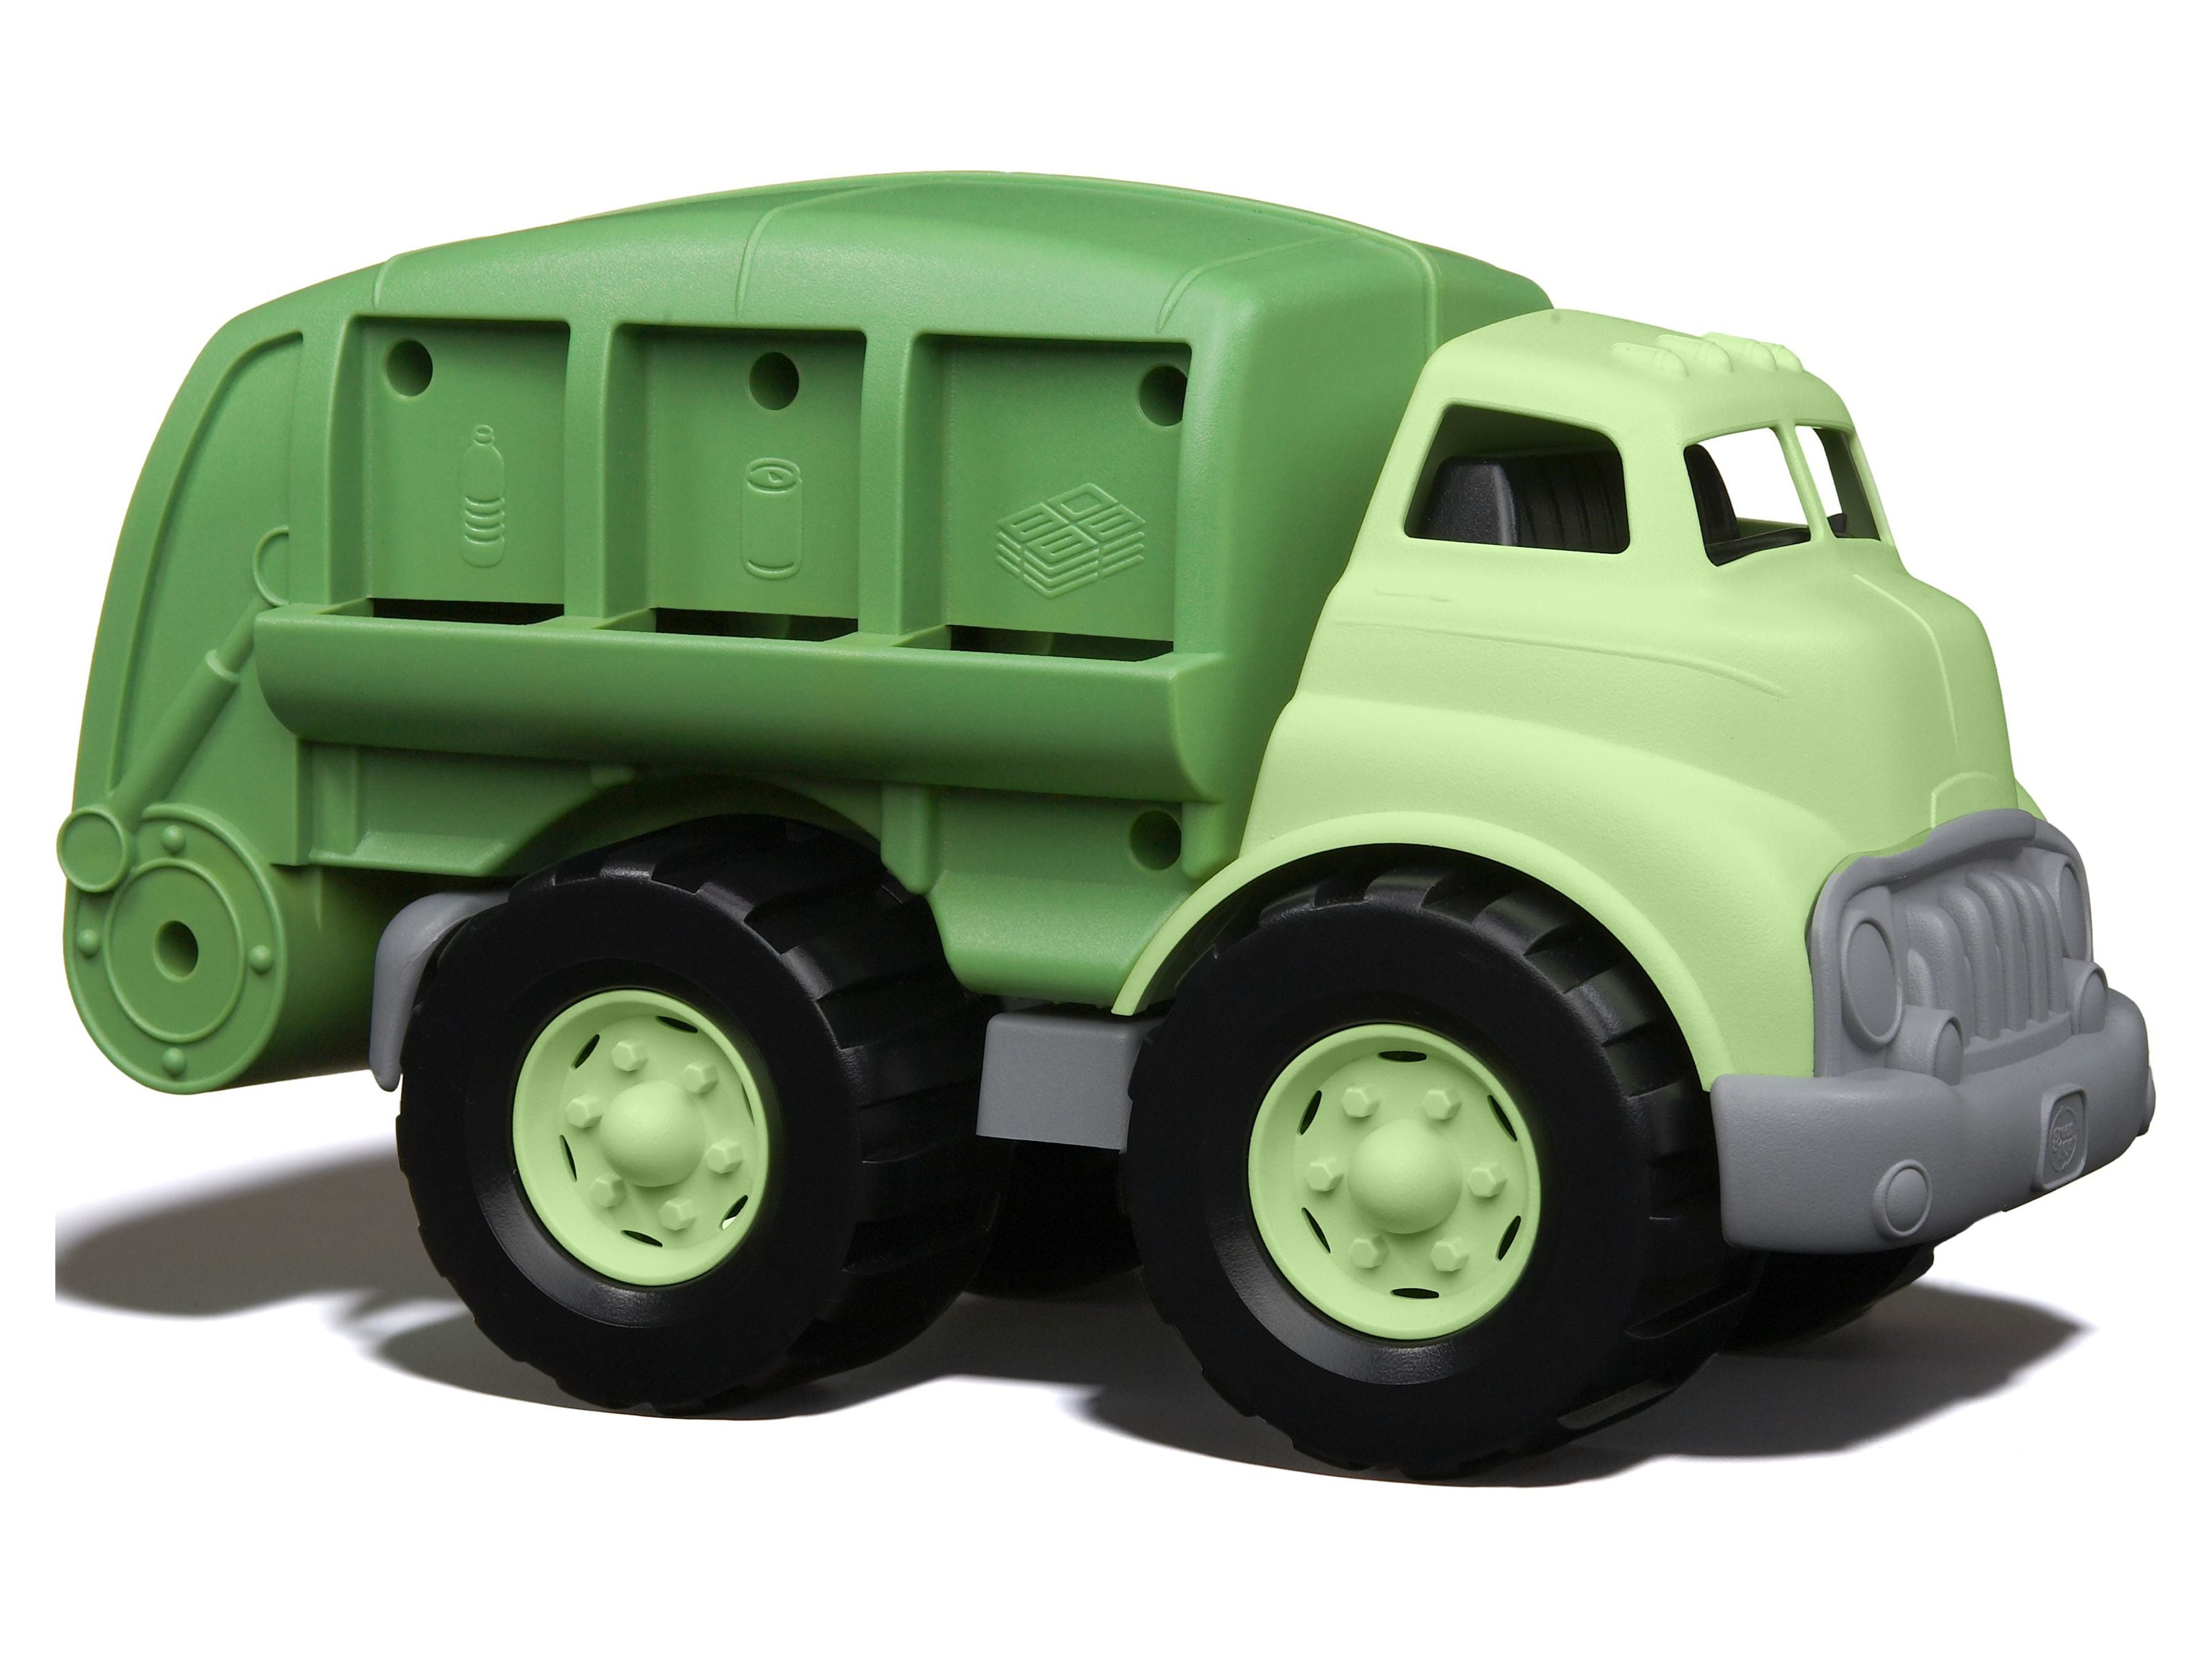 Green Toys Recycling Truck in Green Kids Play Vehicles Unisex - image 1 of 2